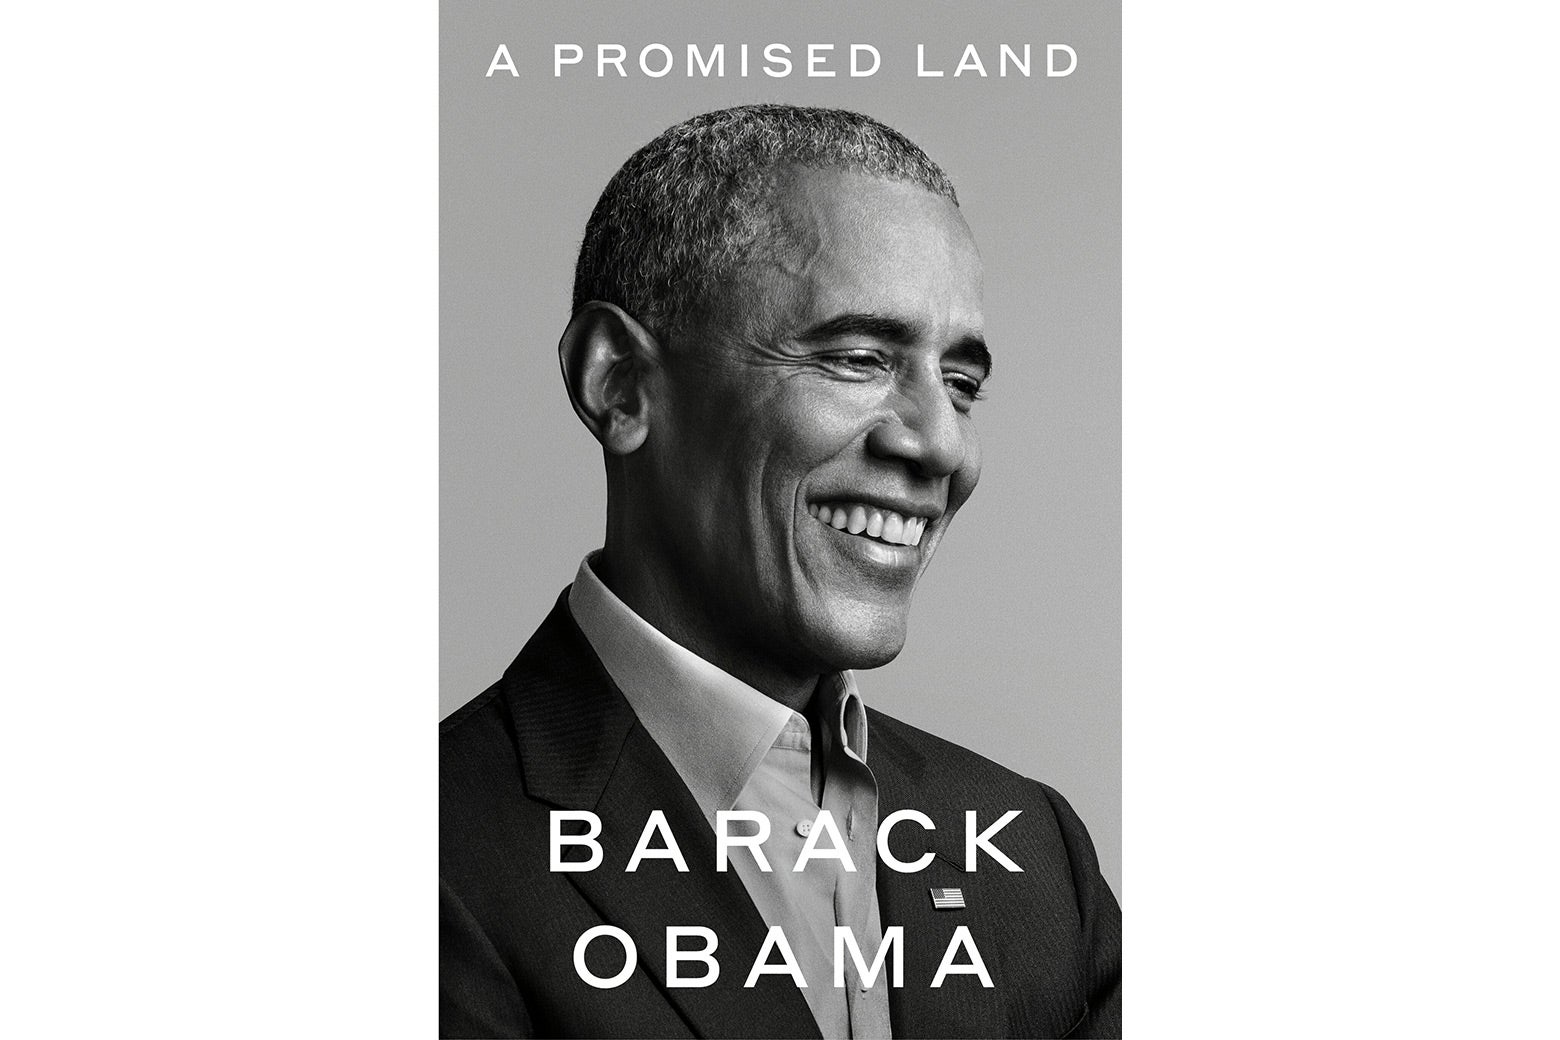 The cover of A Promised Land.